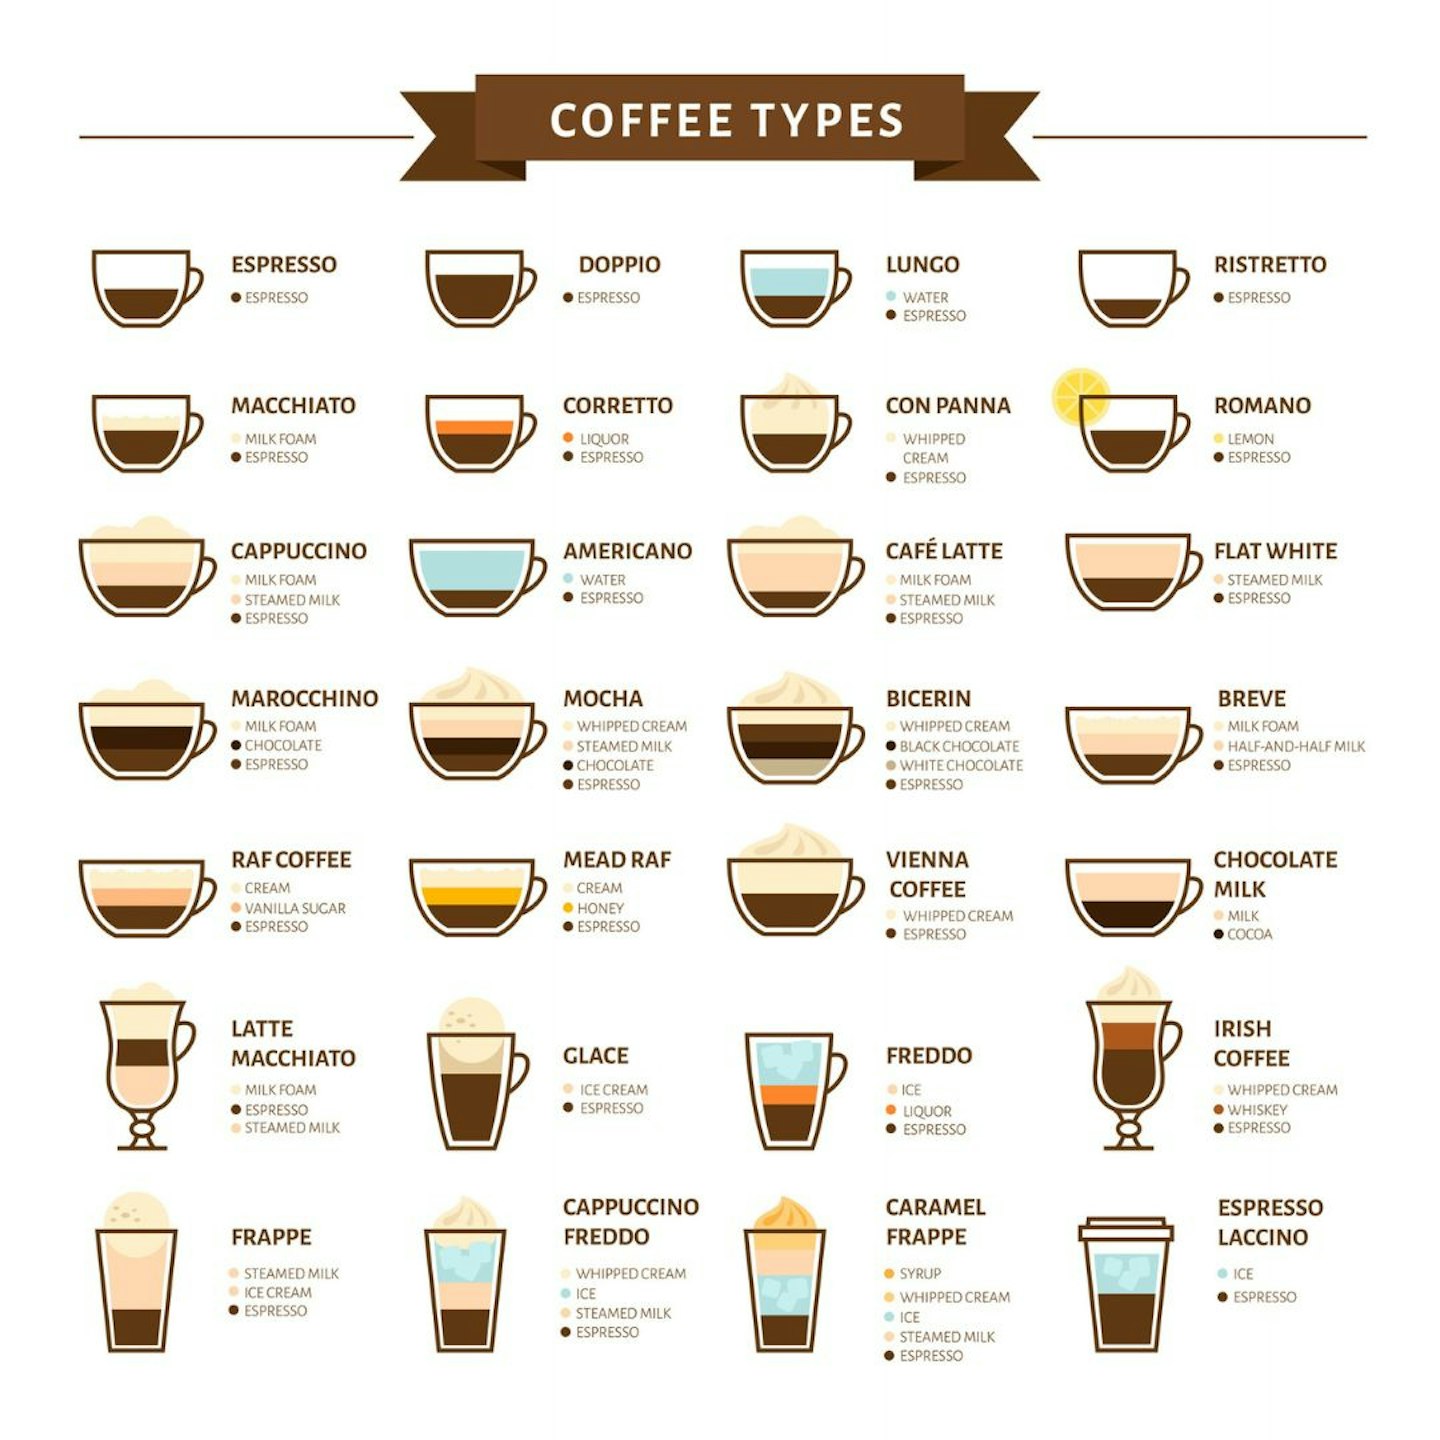 Guide to types of coffee